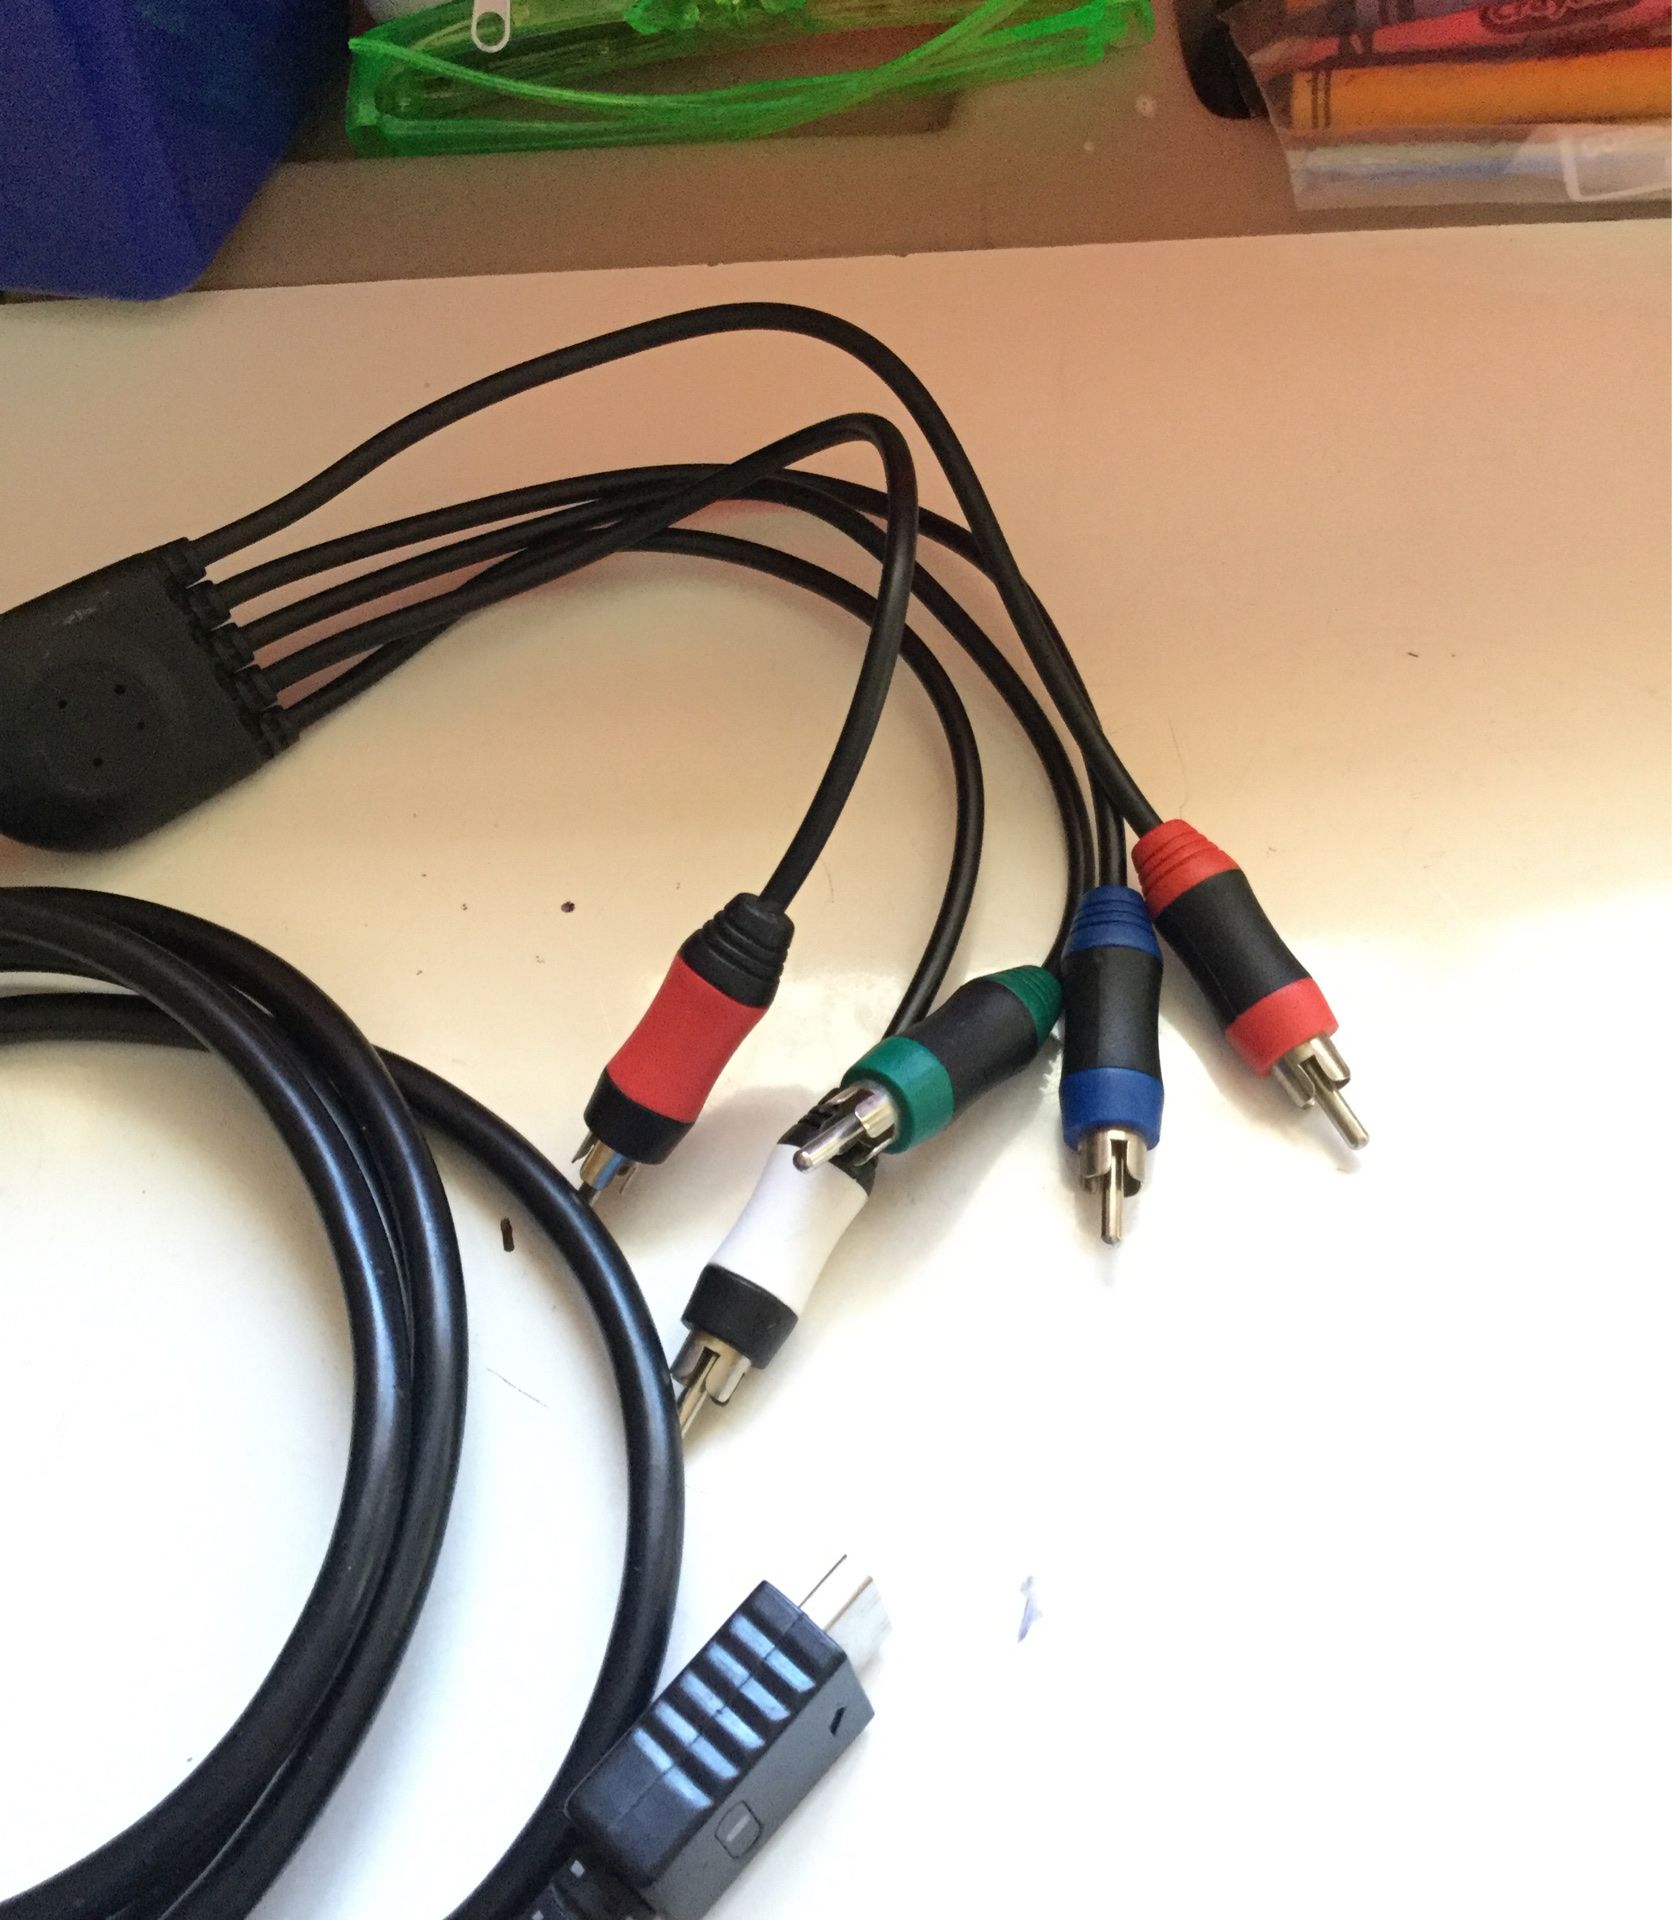 PS2 component cable